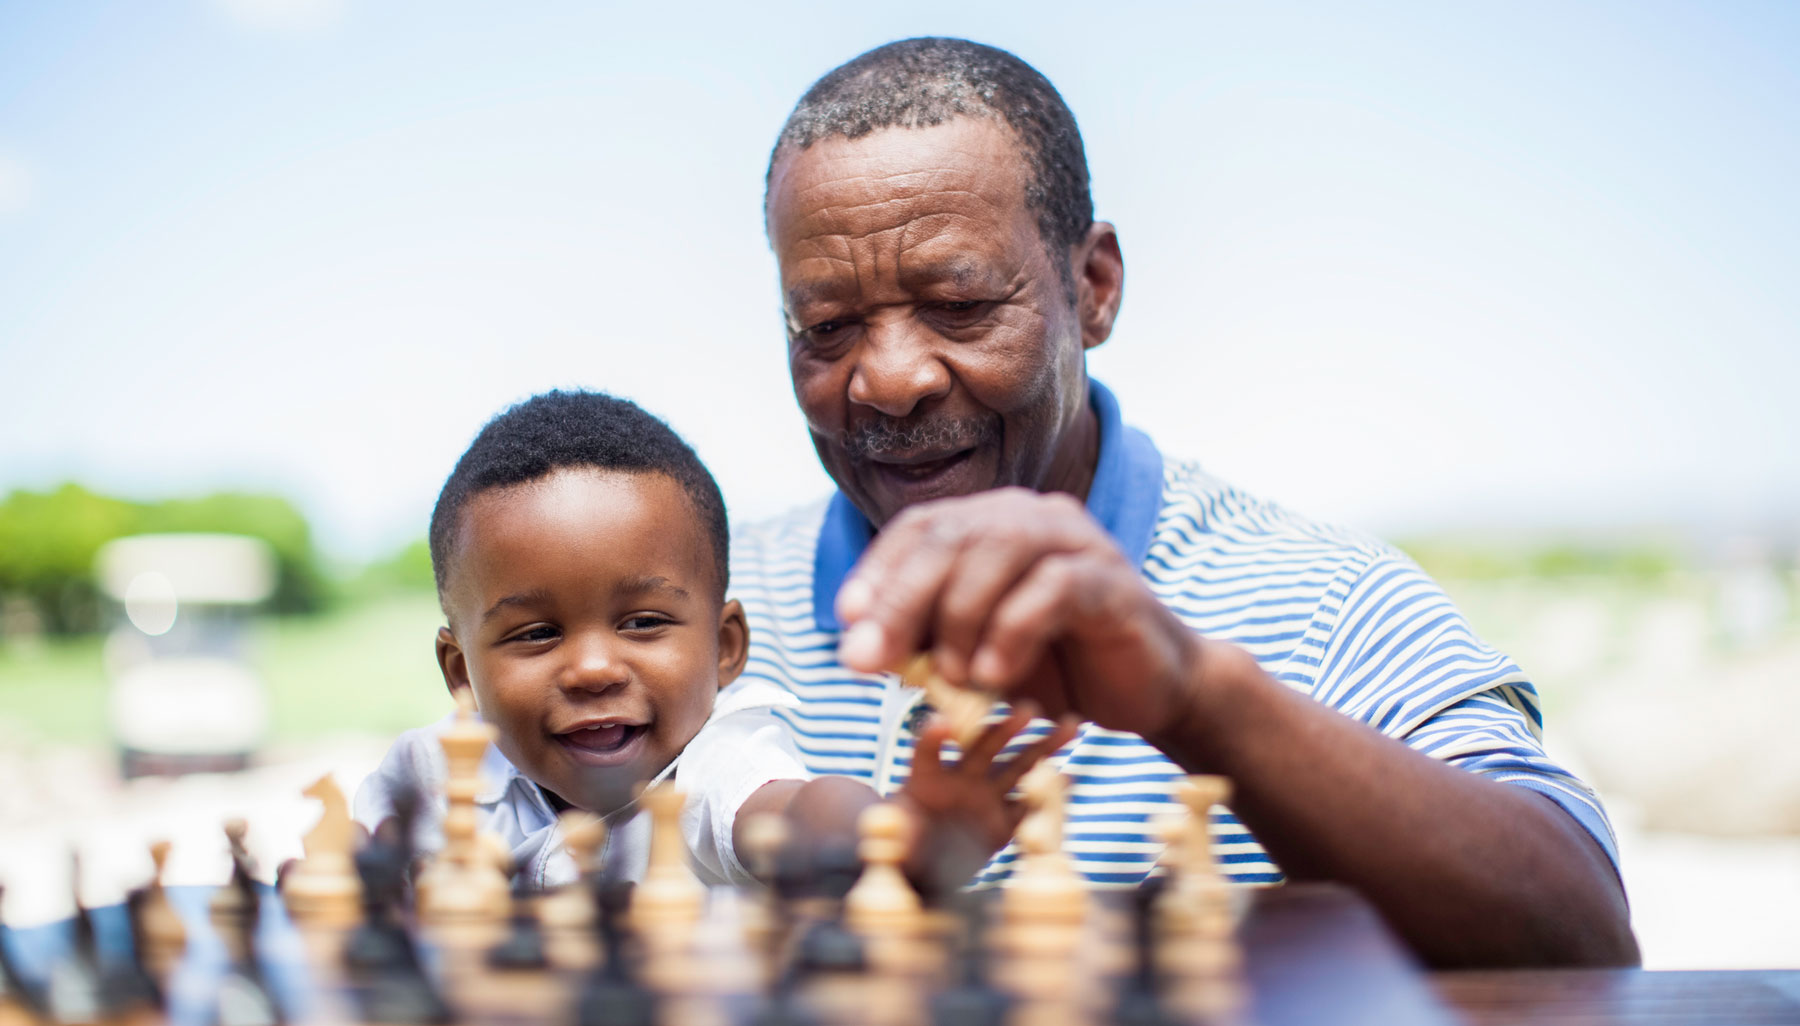 grandfather playing chess with grandson